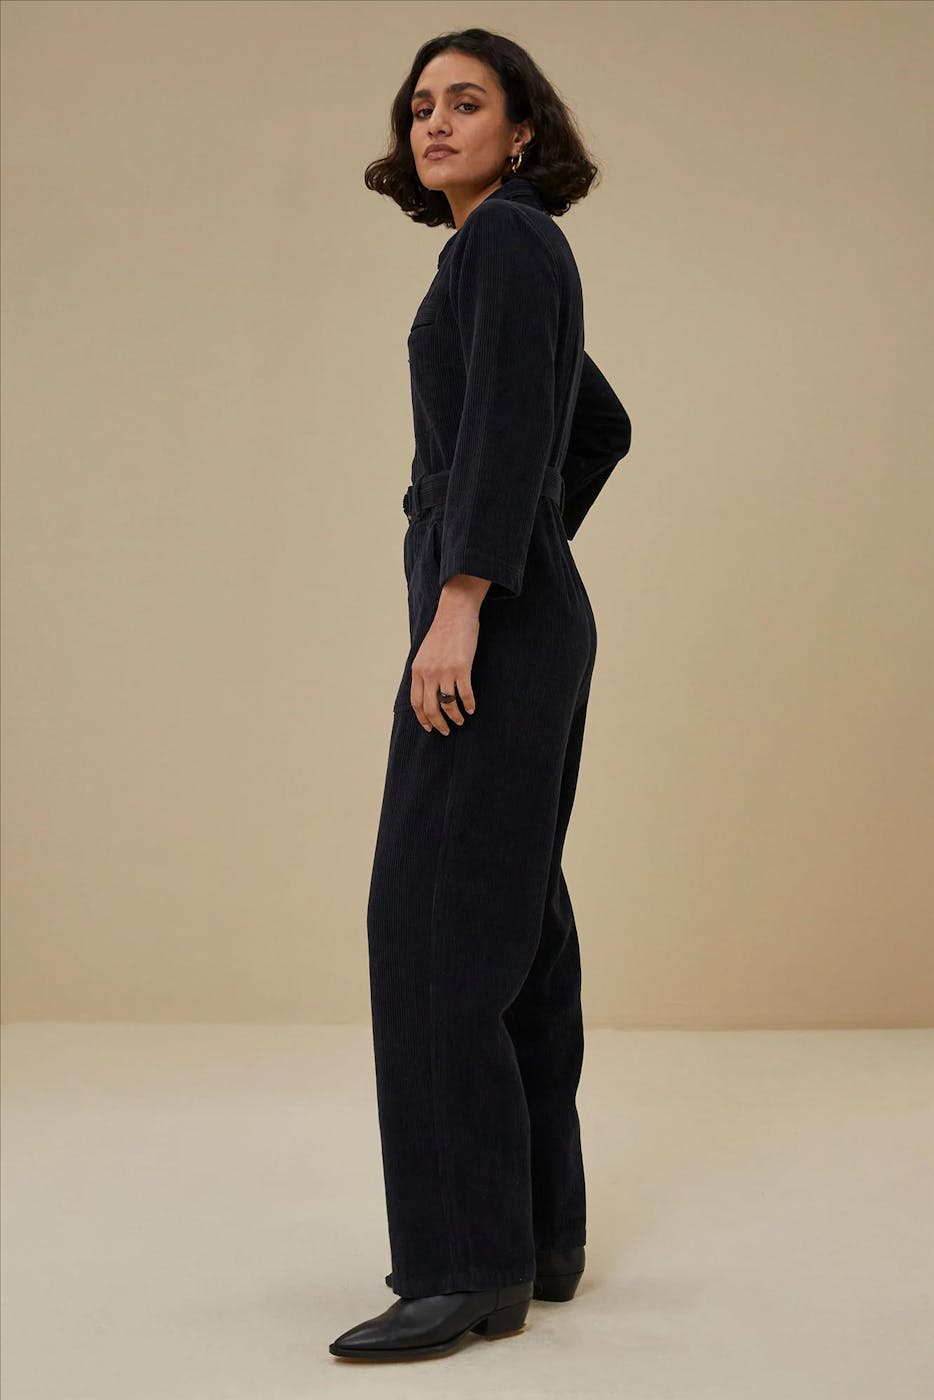 BY BAR - Donkerblauwe Louise jumpsuit